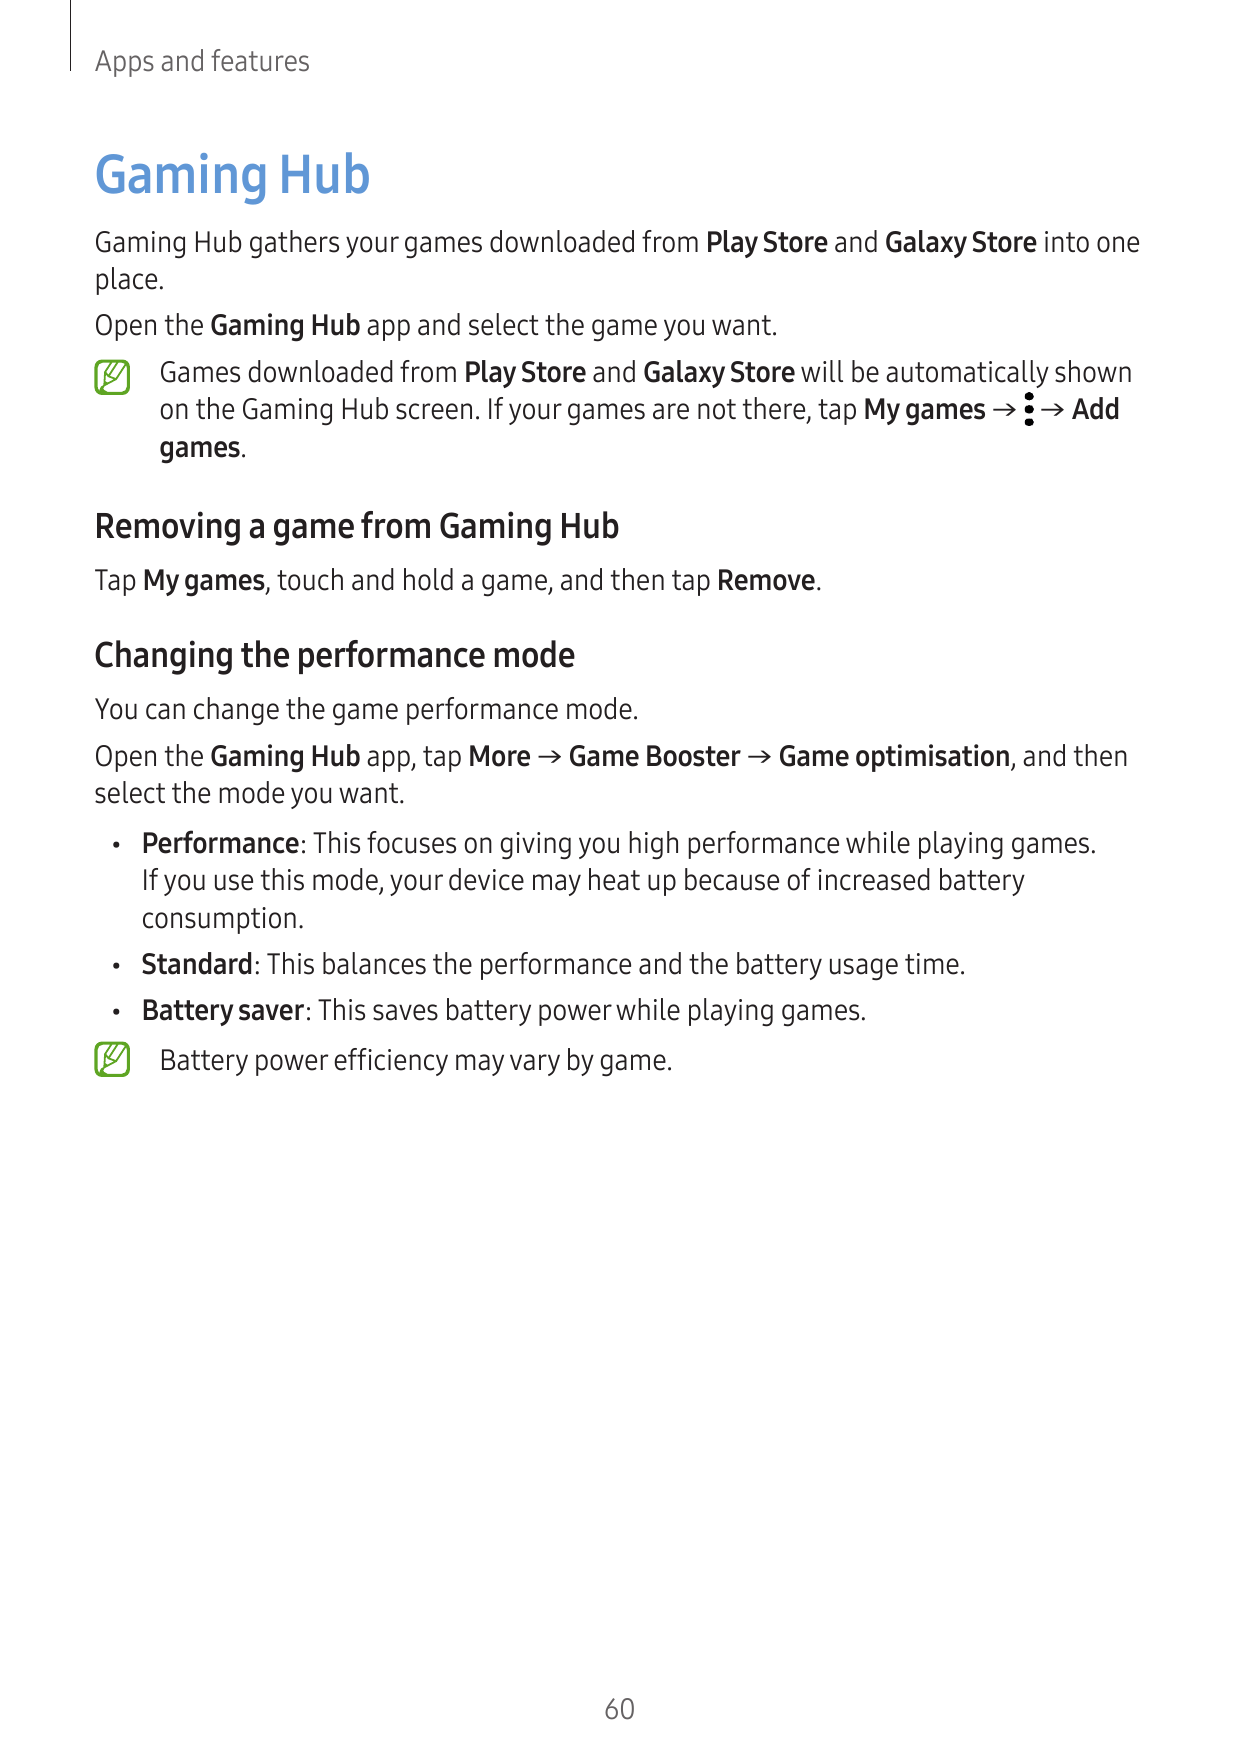 Apps and featuresGaming HubGaming Hub gathers your games downloaded from Play Store and Galaxy Store into oneplace.Open the Gami